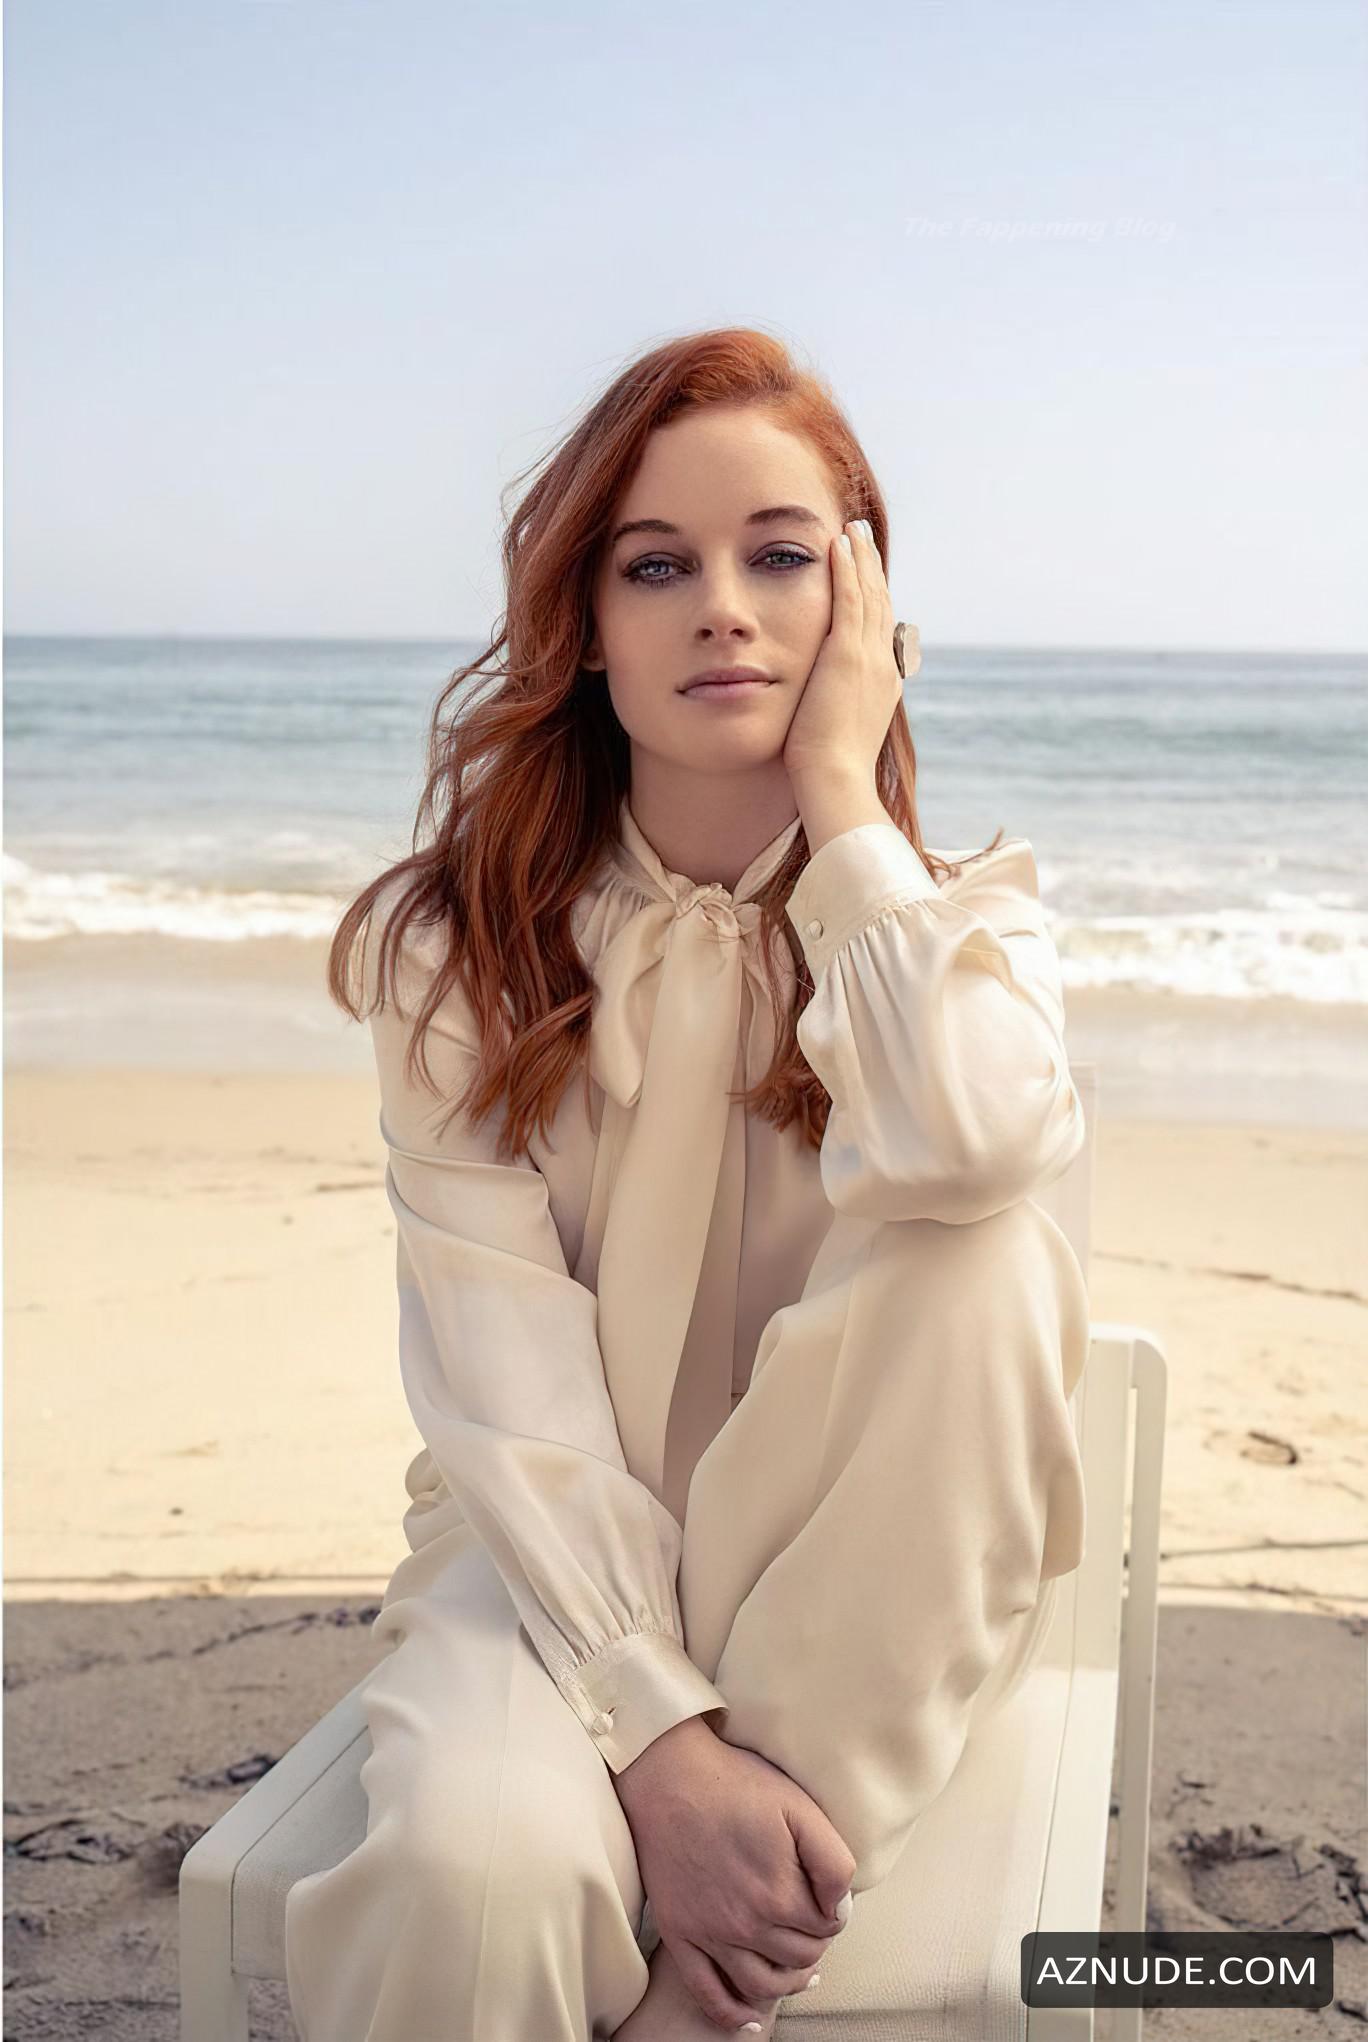 Jane levy topless